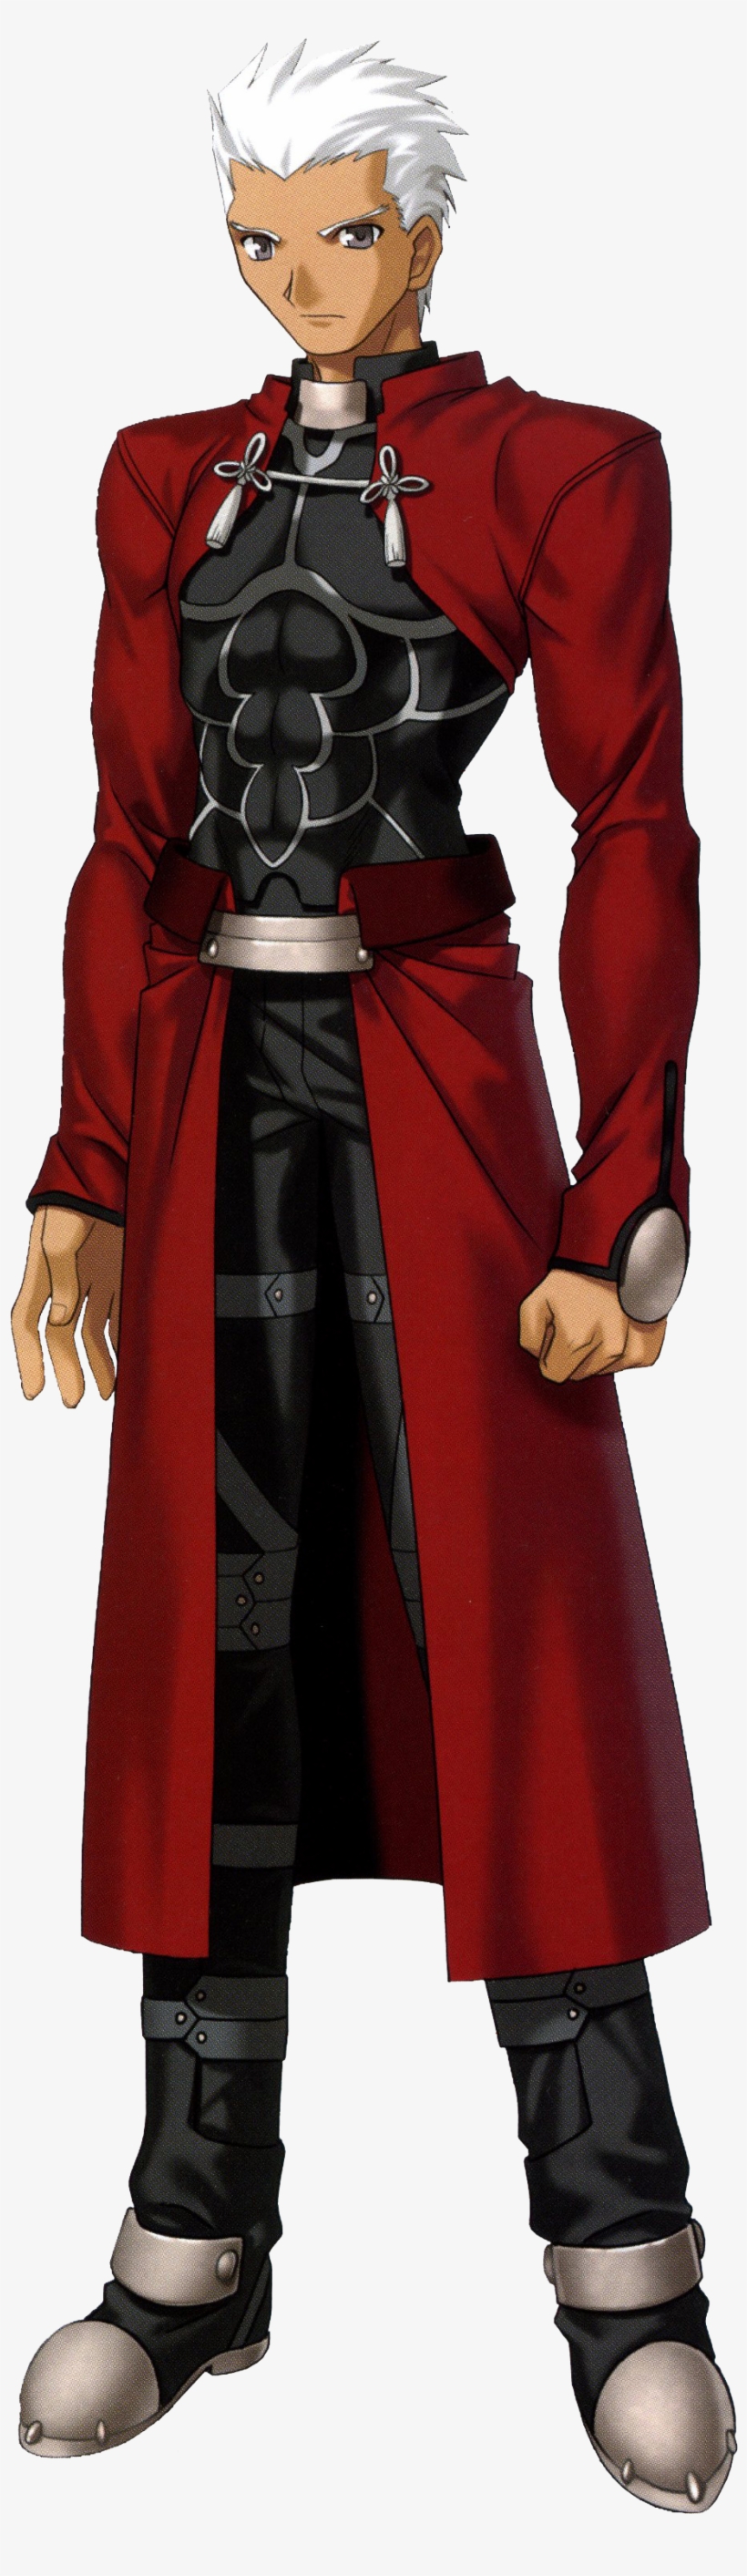 Archer - Fate Stay Night Personnage, transparent png #2106917